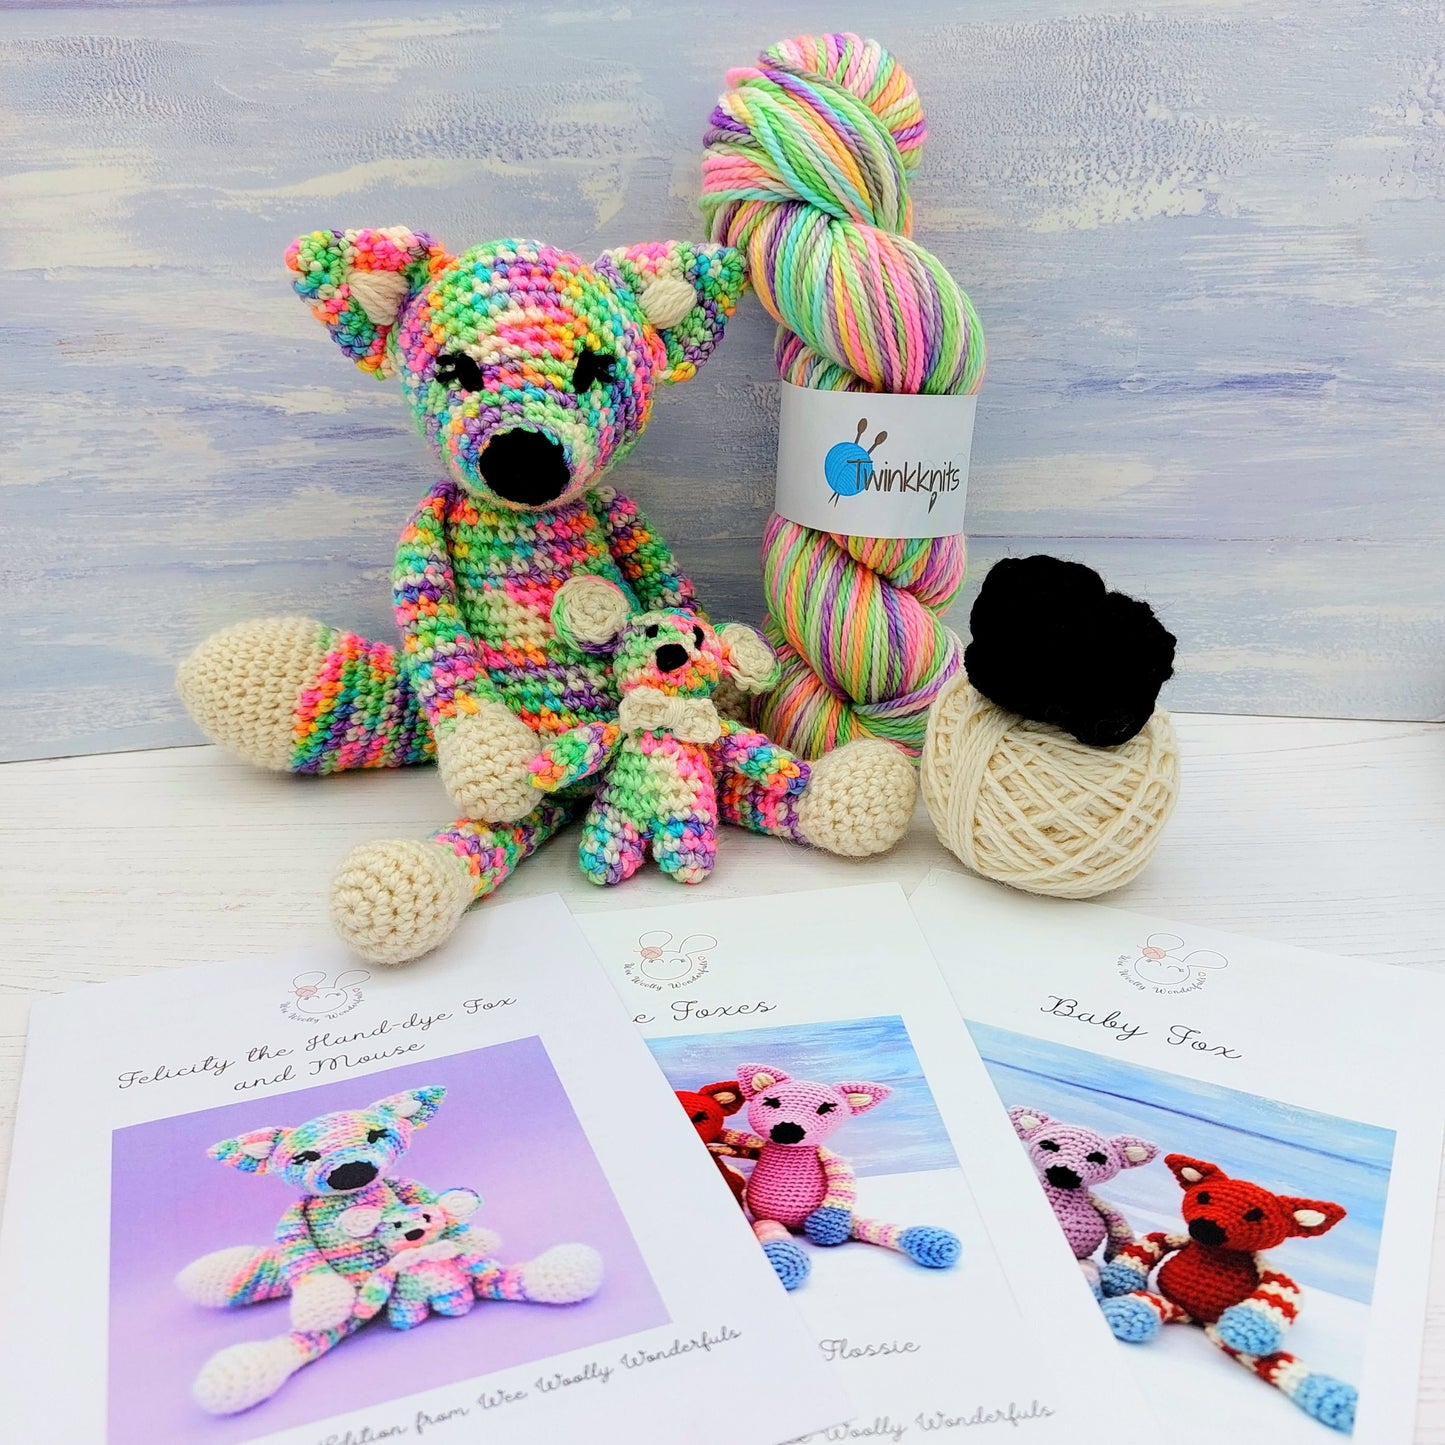 Crochet Toys made from crohet kit with hand dye wool